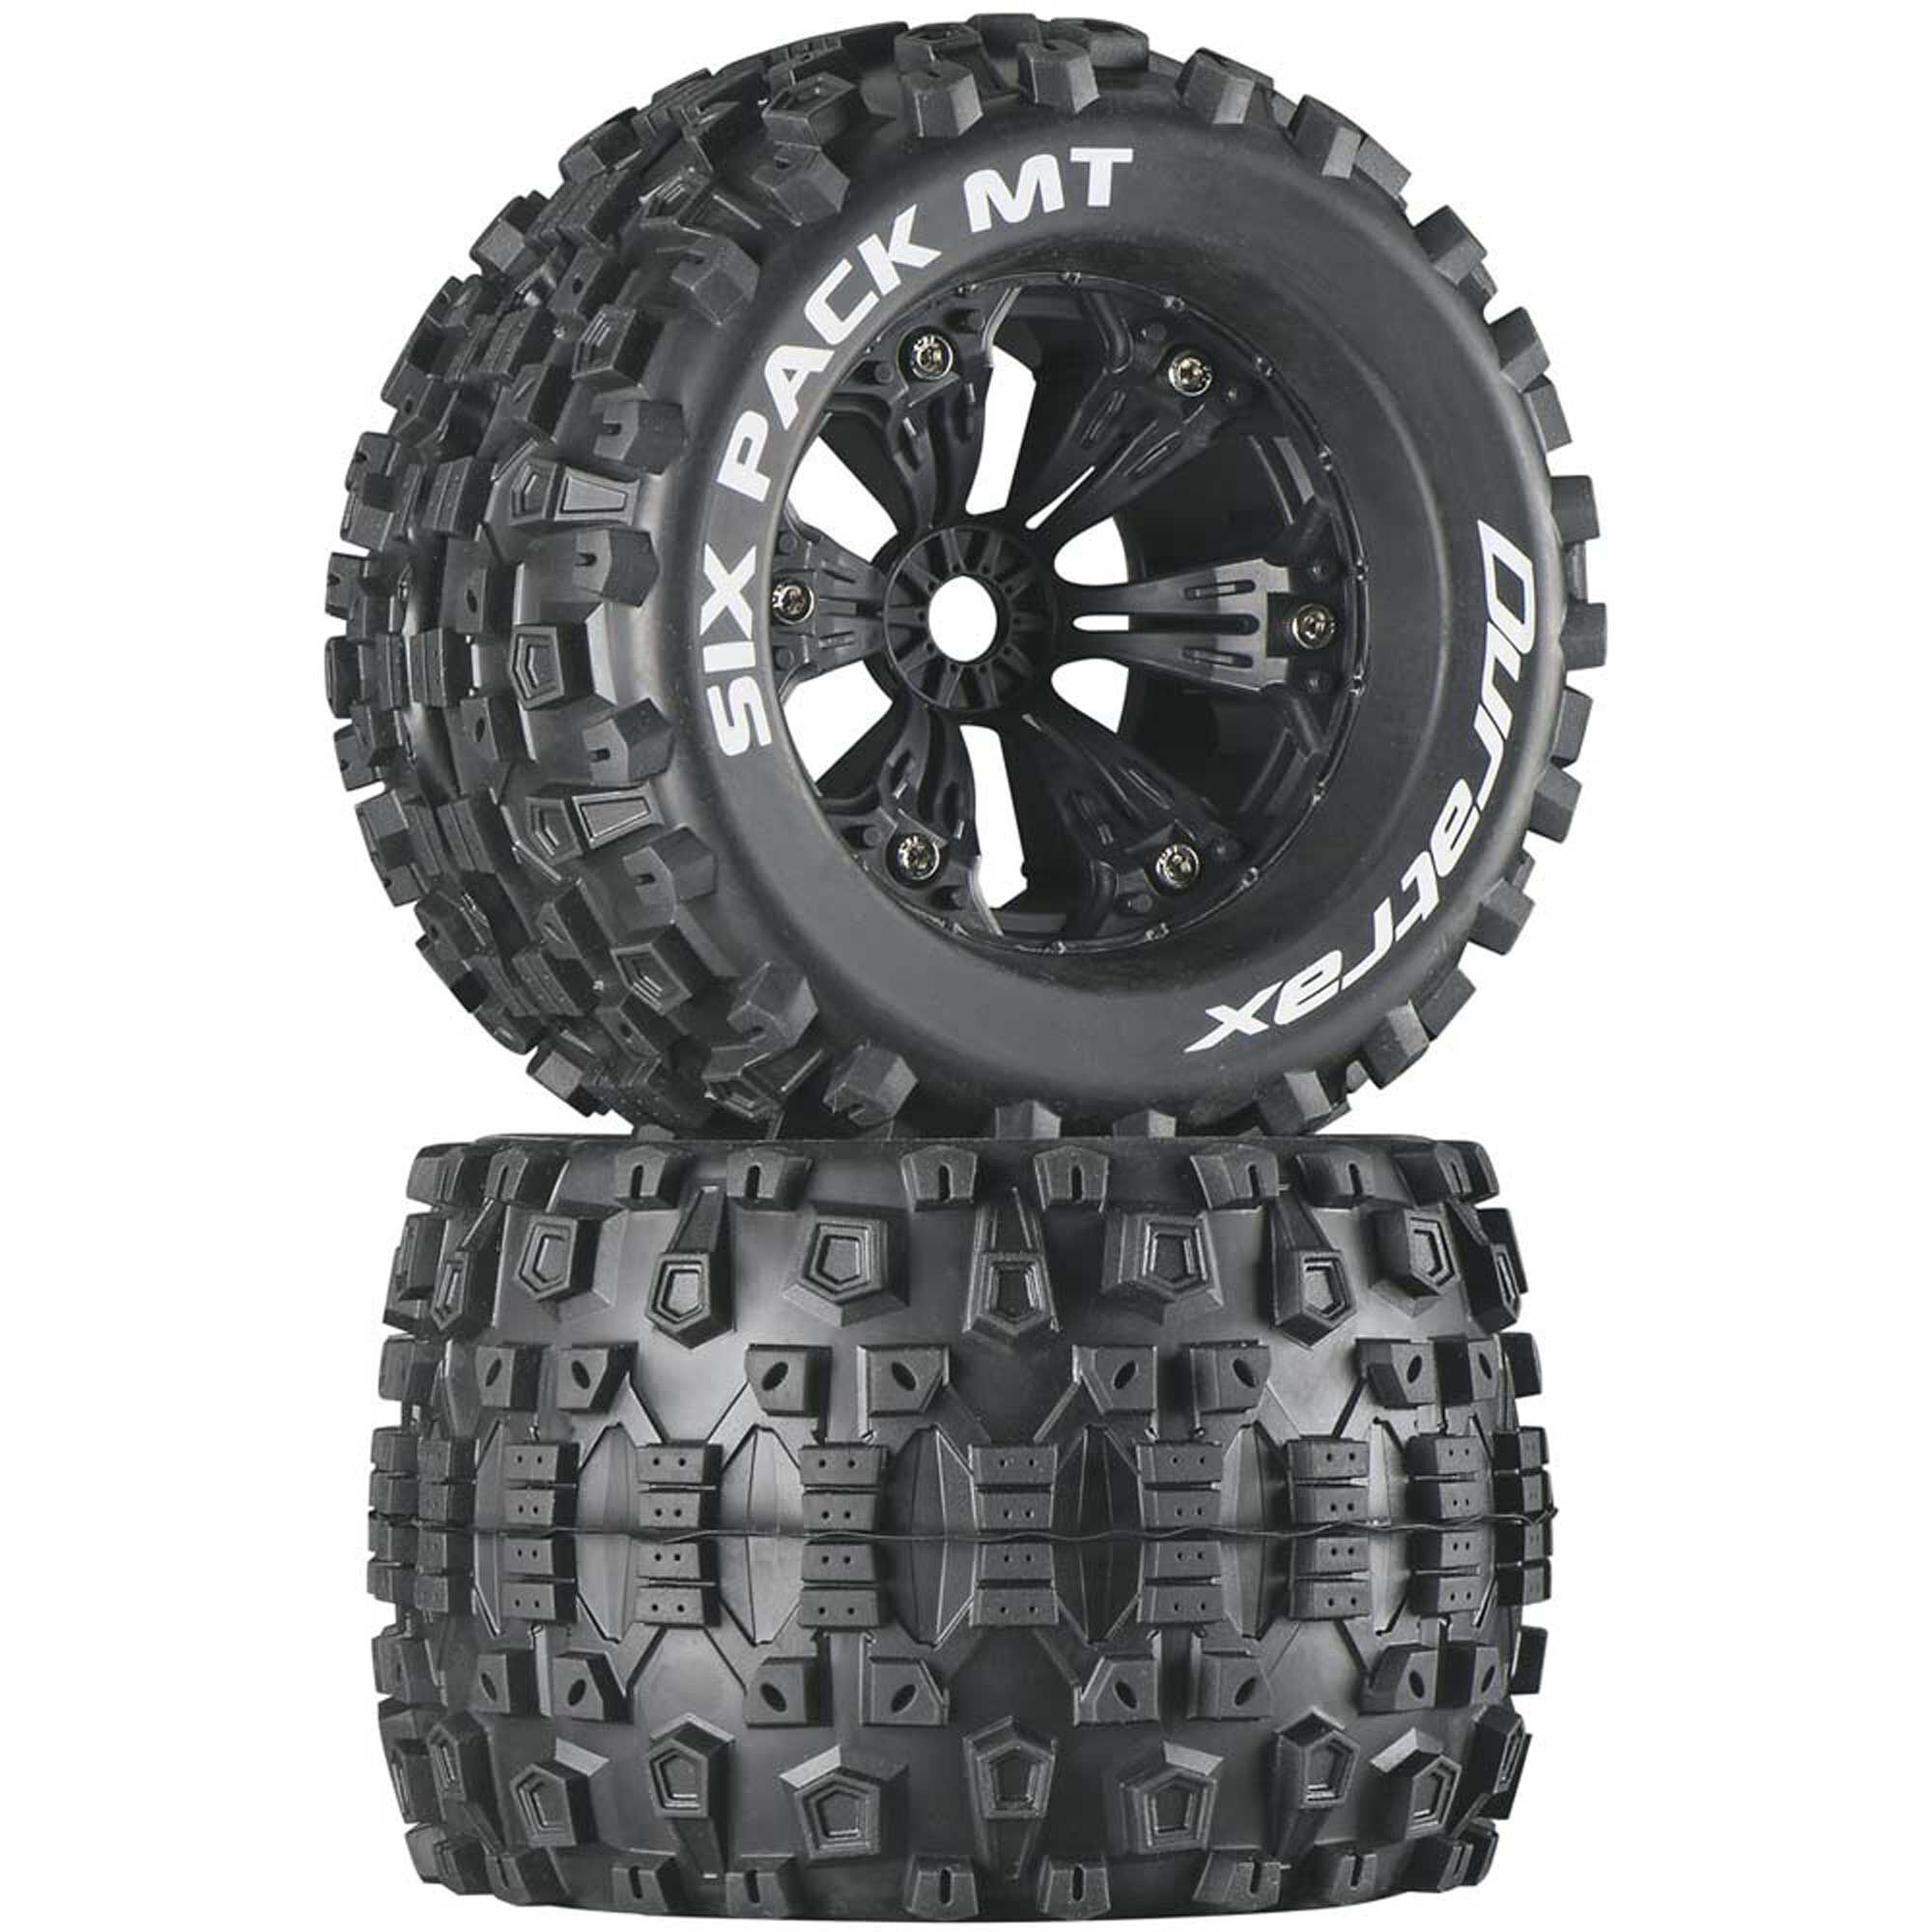 Duratrax Six-Pack MT 3.8" Mounted 1/2" Offset Tires Black 2